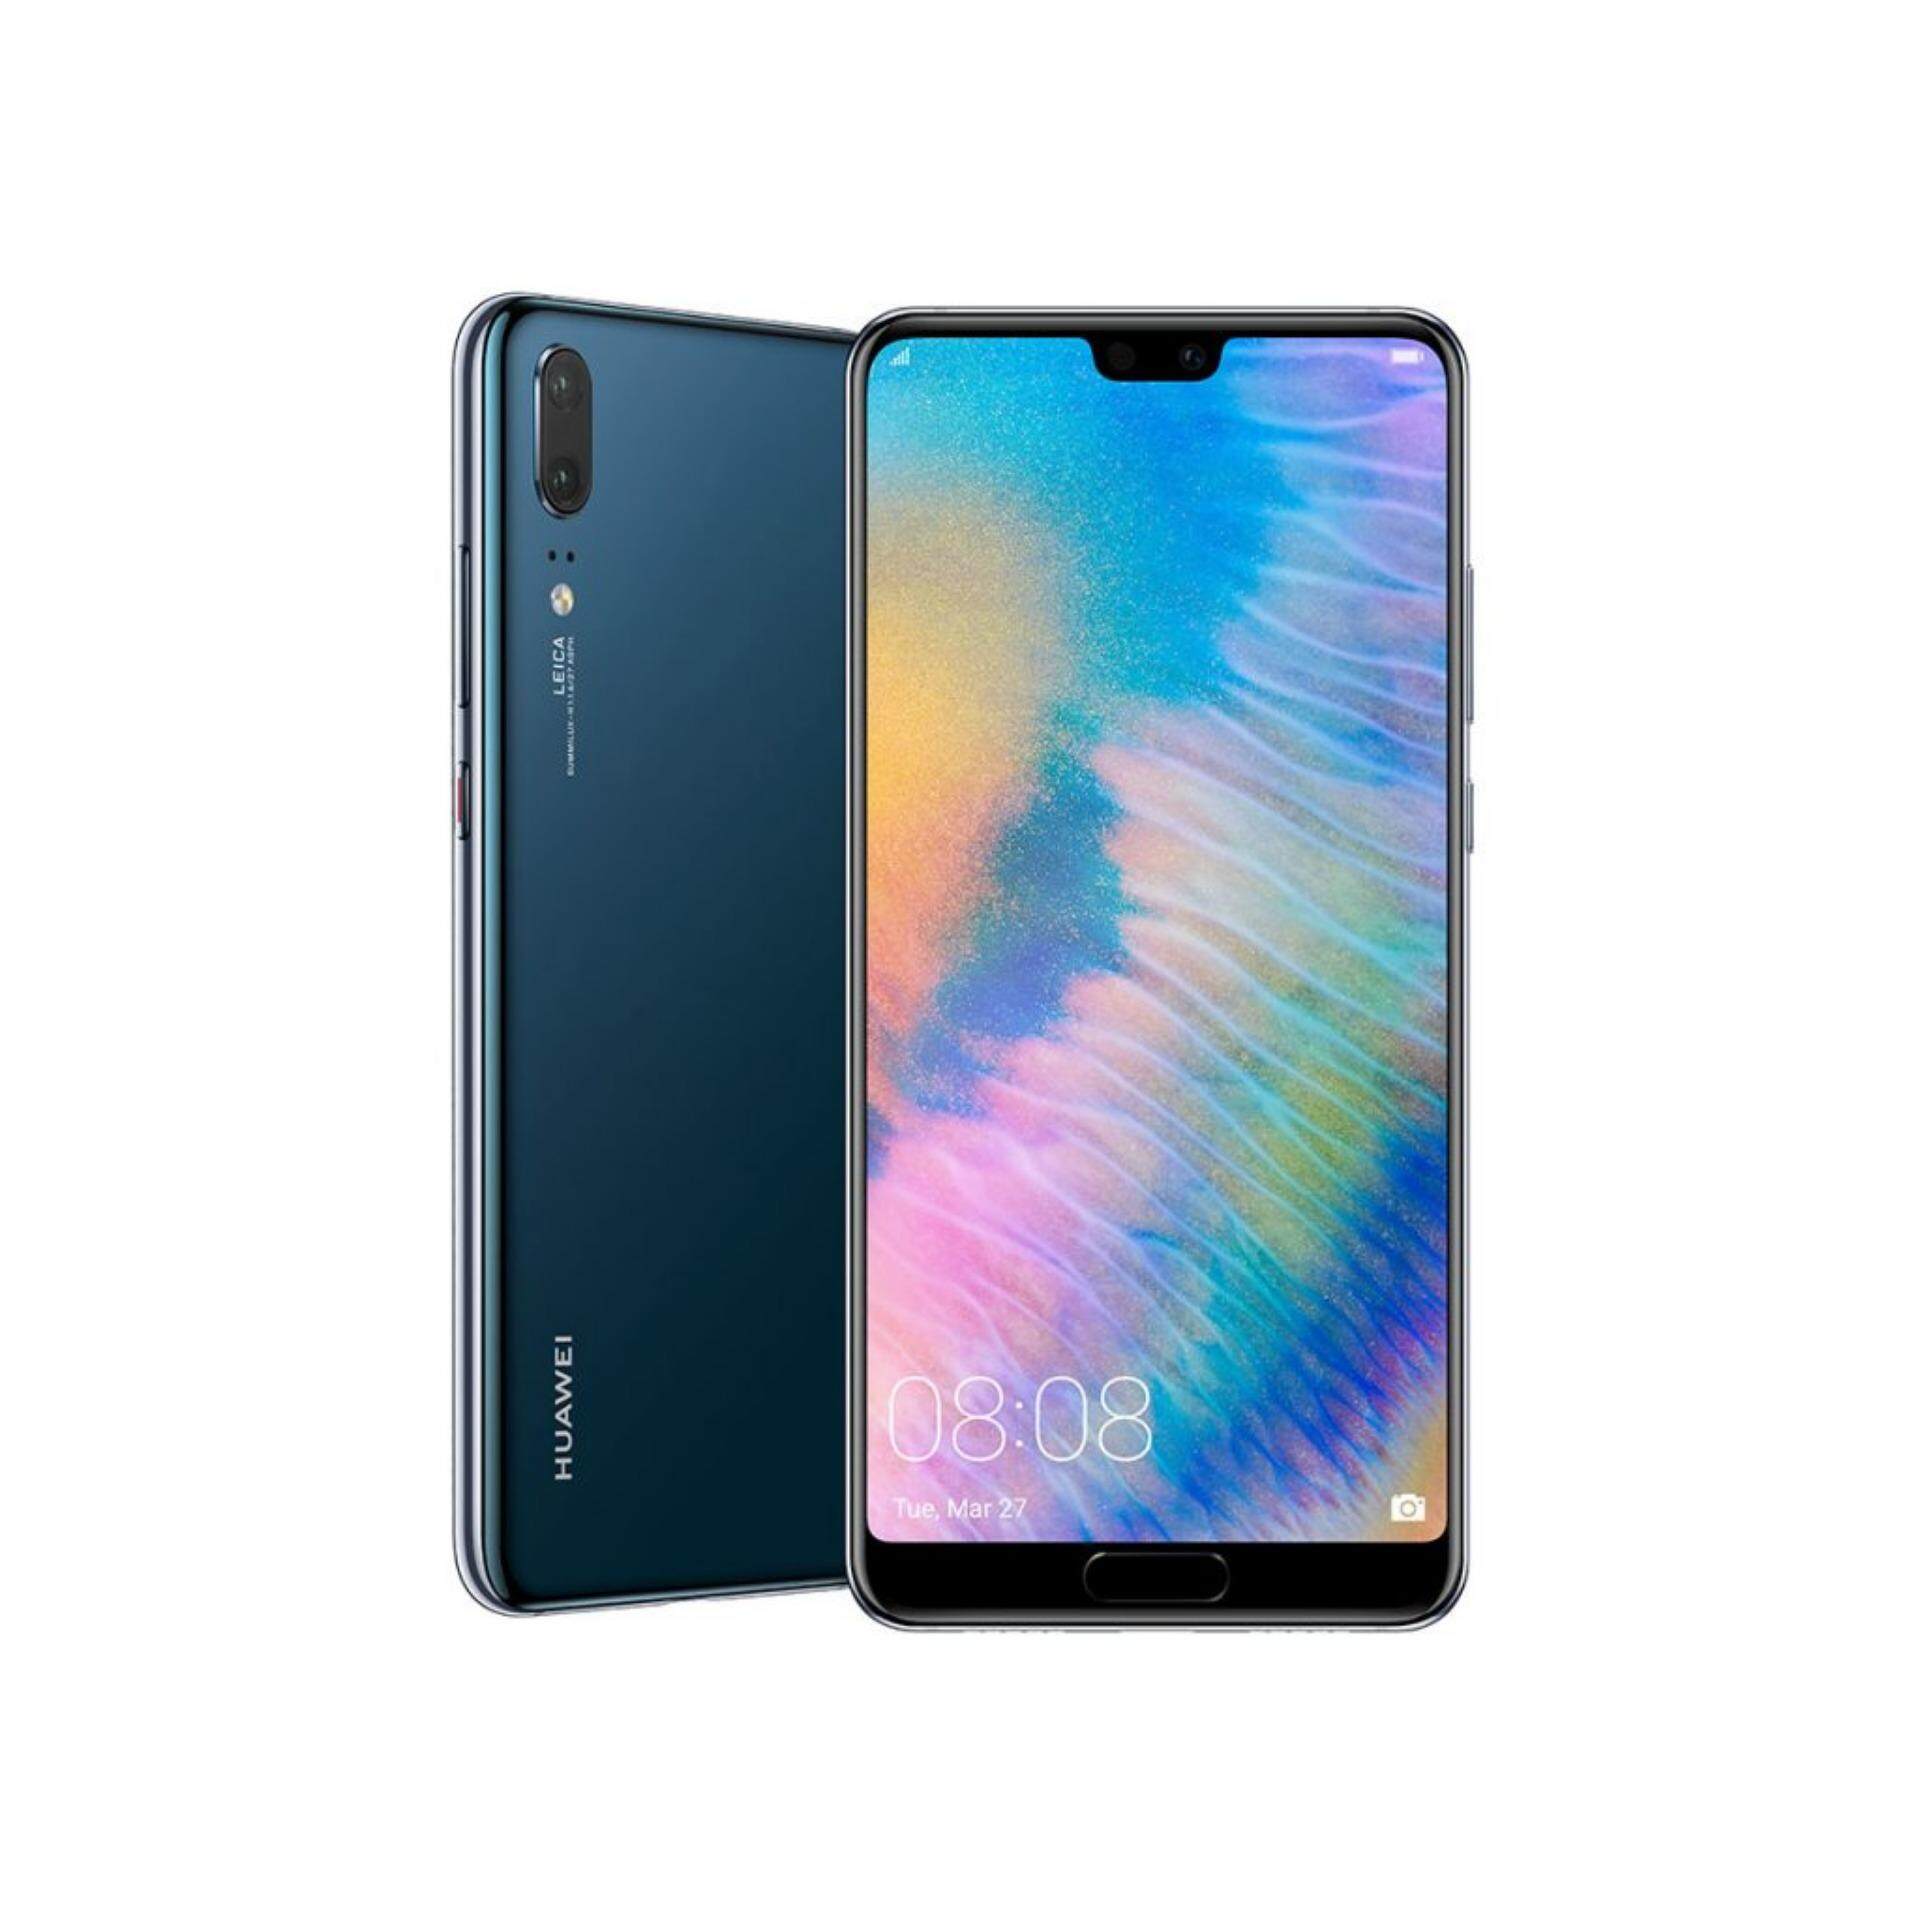 Huawei P20 Price in Malaysia & Specs | TechNave